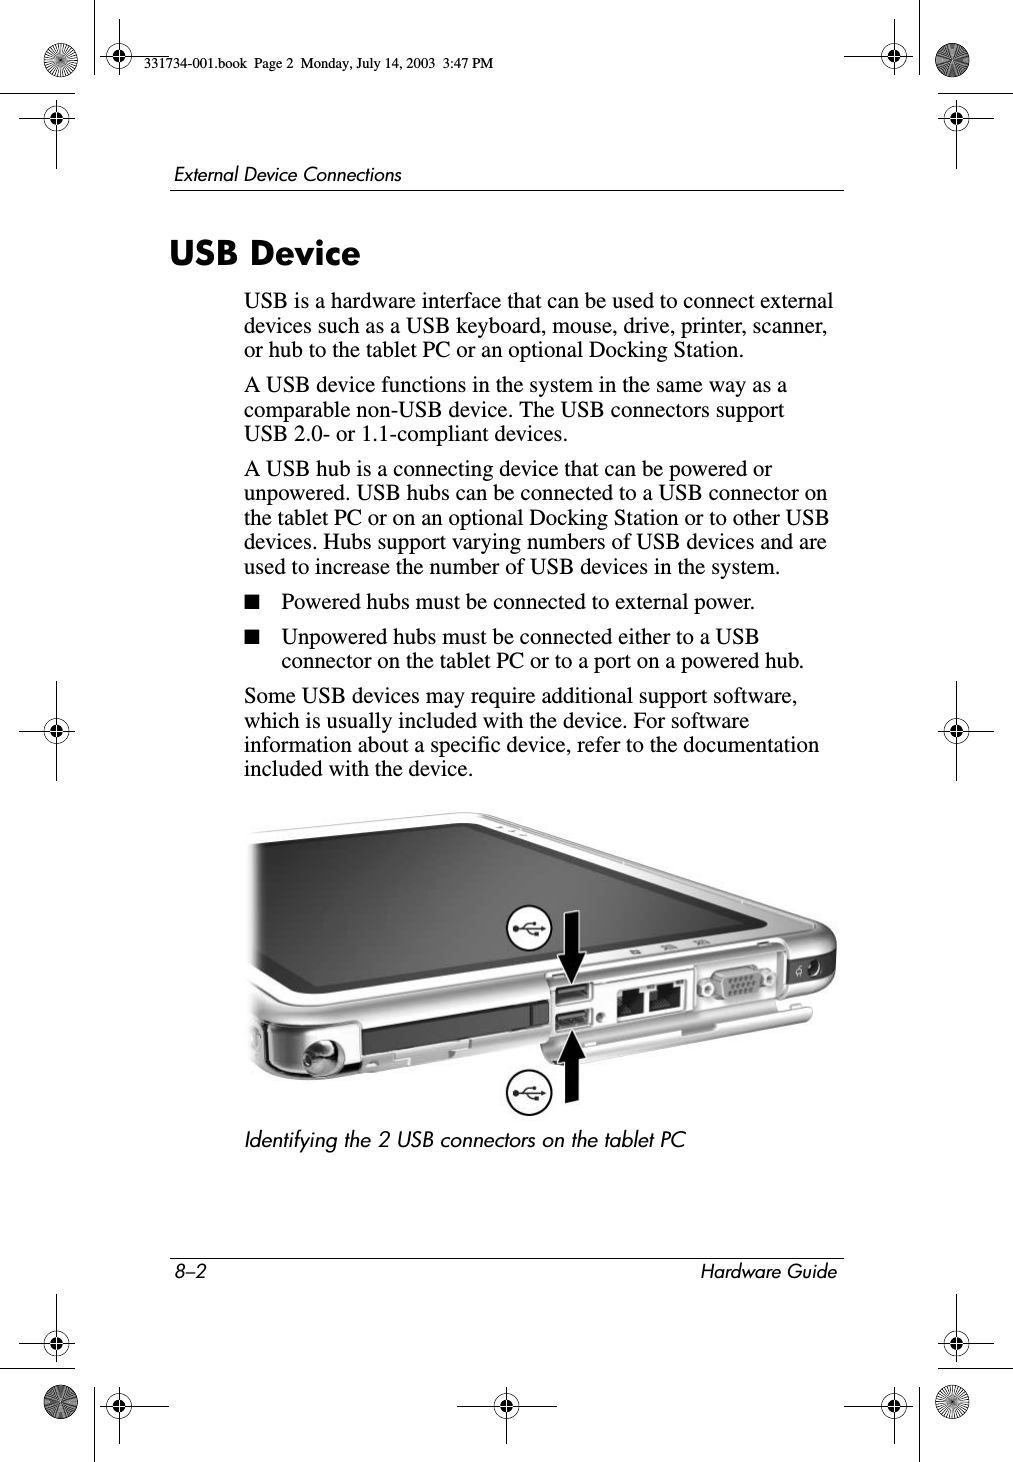 8–2 Hardware GuideExternal Device ConnectionsUSB DeviceUSB is a hardware interface that can be used to connect external devices such as a USB keyboard, mouse, drive, printer, scanner, or hub to the tablet PC or an optional Docking Station.A USB device functions in the system in the same way as a comparable non-USB device. The USB connectors support USB 2.0- or 1.1-compliant devices.A USB hub is a connecting device that can be powered or unpowered. USB hubs can be connected to a USB connector on the tablet PC or on an optional Docking Station or to other USB devices. Hubs support varying numbers of USB devices and are used to increase the number of USB devices in the system.■Powered hubs must be connected to external power.■Unpowered hubs must be connected either to a USB connector on the tablet PC or to a port on a powered hub.Some USB devices may require additional support software, which is usually included with the device. For software information about a specific device, refer to the documentation included with the device.Identifying the 2 USB connectors on the tablet PC331734-001.book  Page 2  Monday, July 14, 2003  3:47 PM